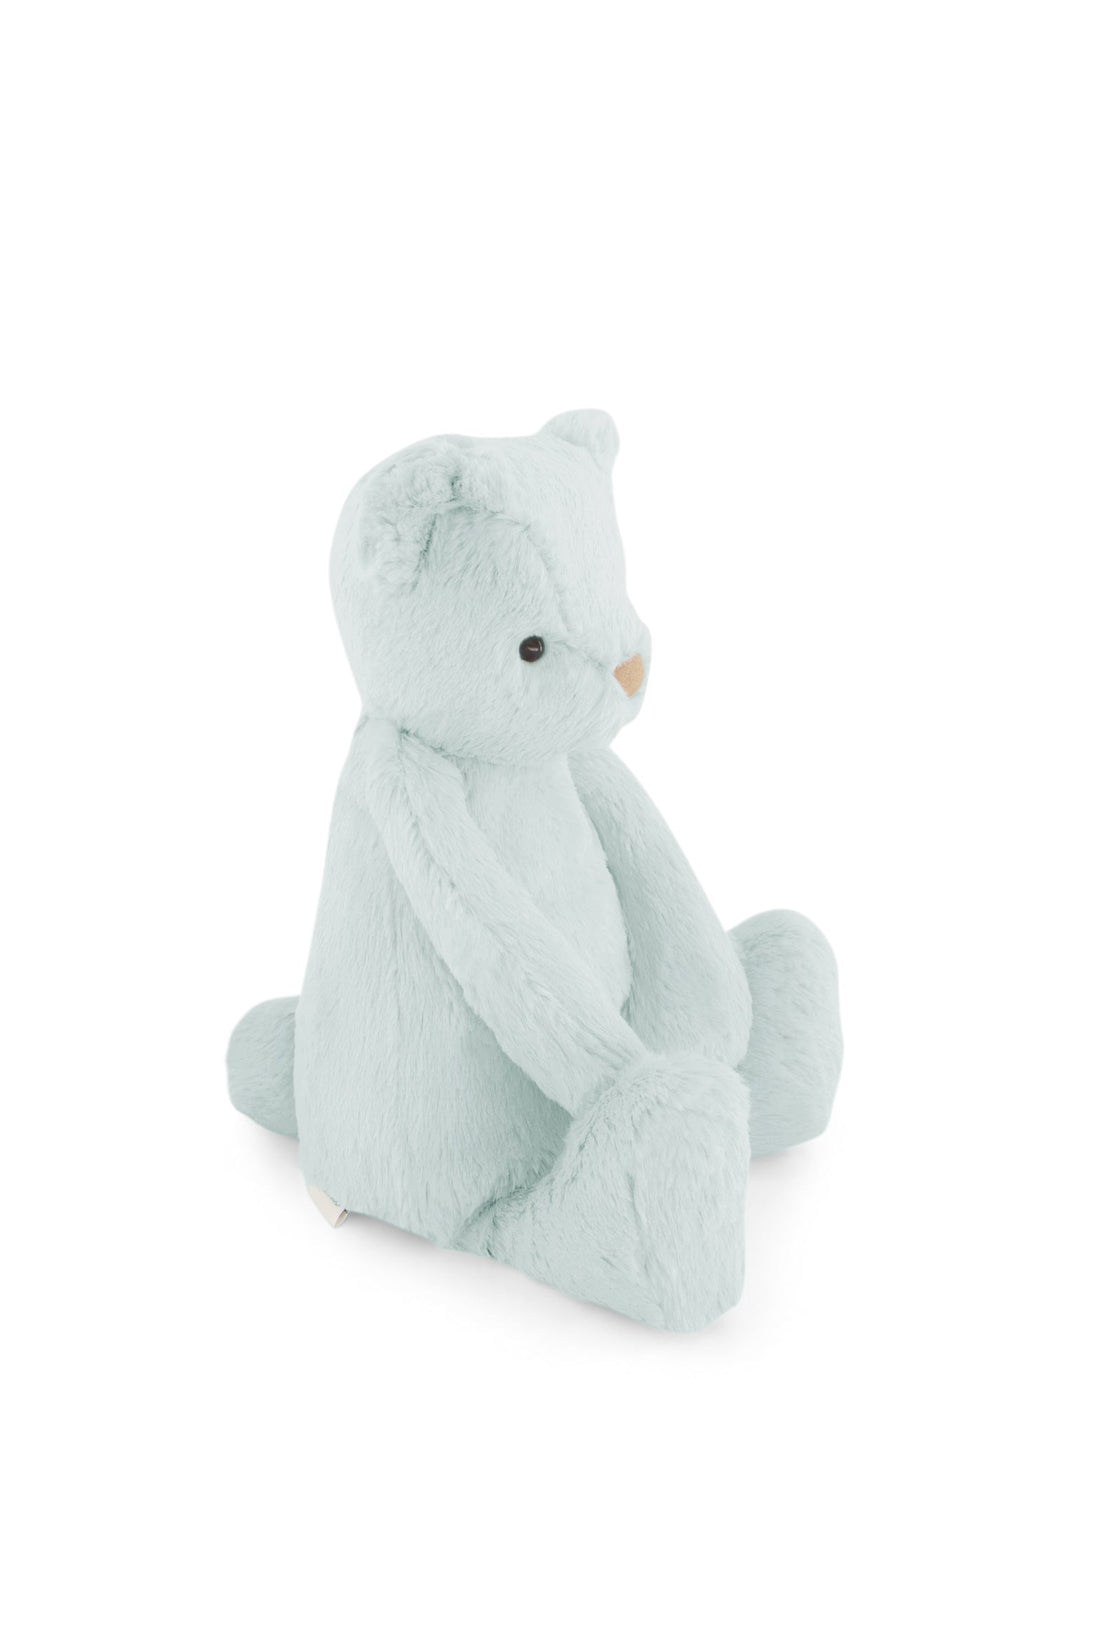 Snuggle Bunnies - George the Bear - Sky Childrens Toy from Jamie Kay USA